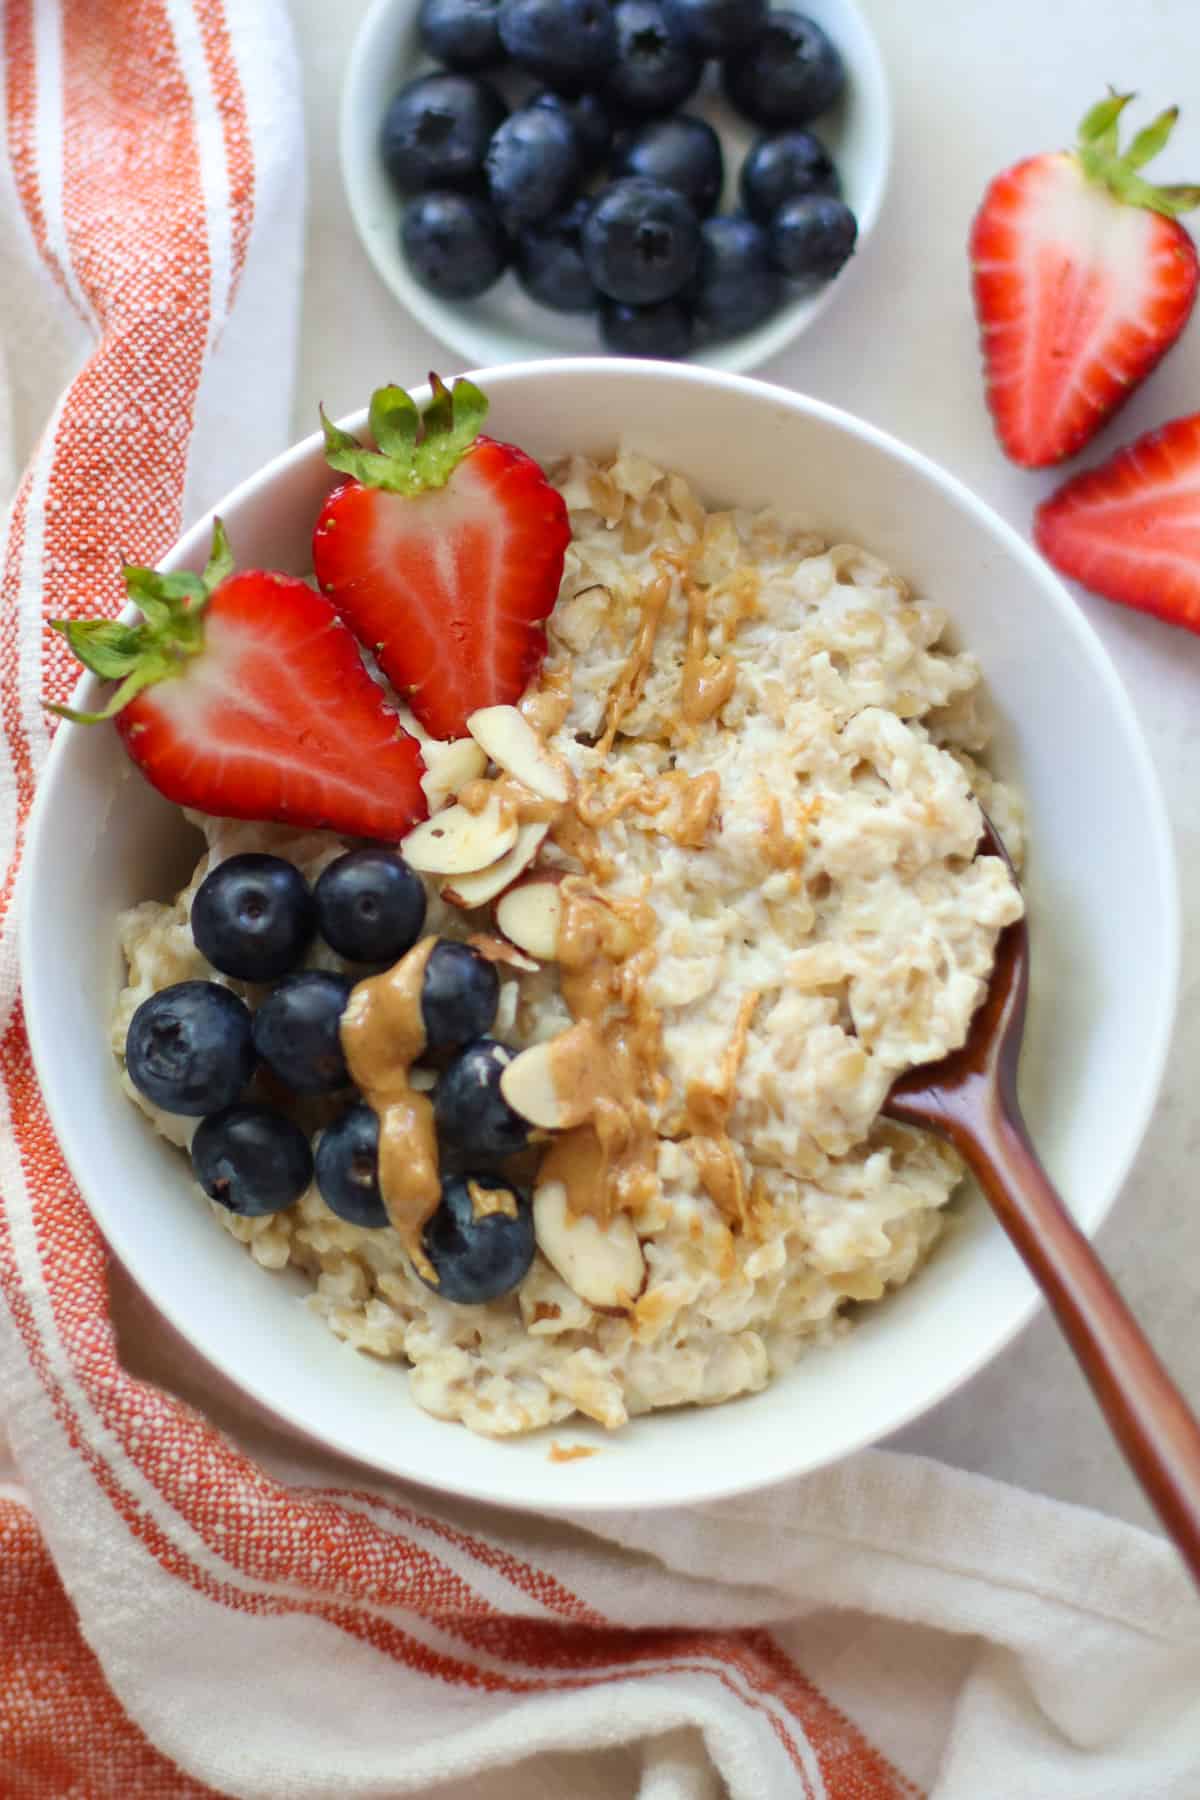 A bowl of oat pudding with strawberries, blueberries, and peanut butter.